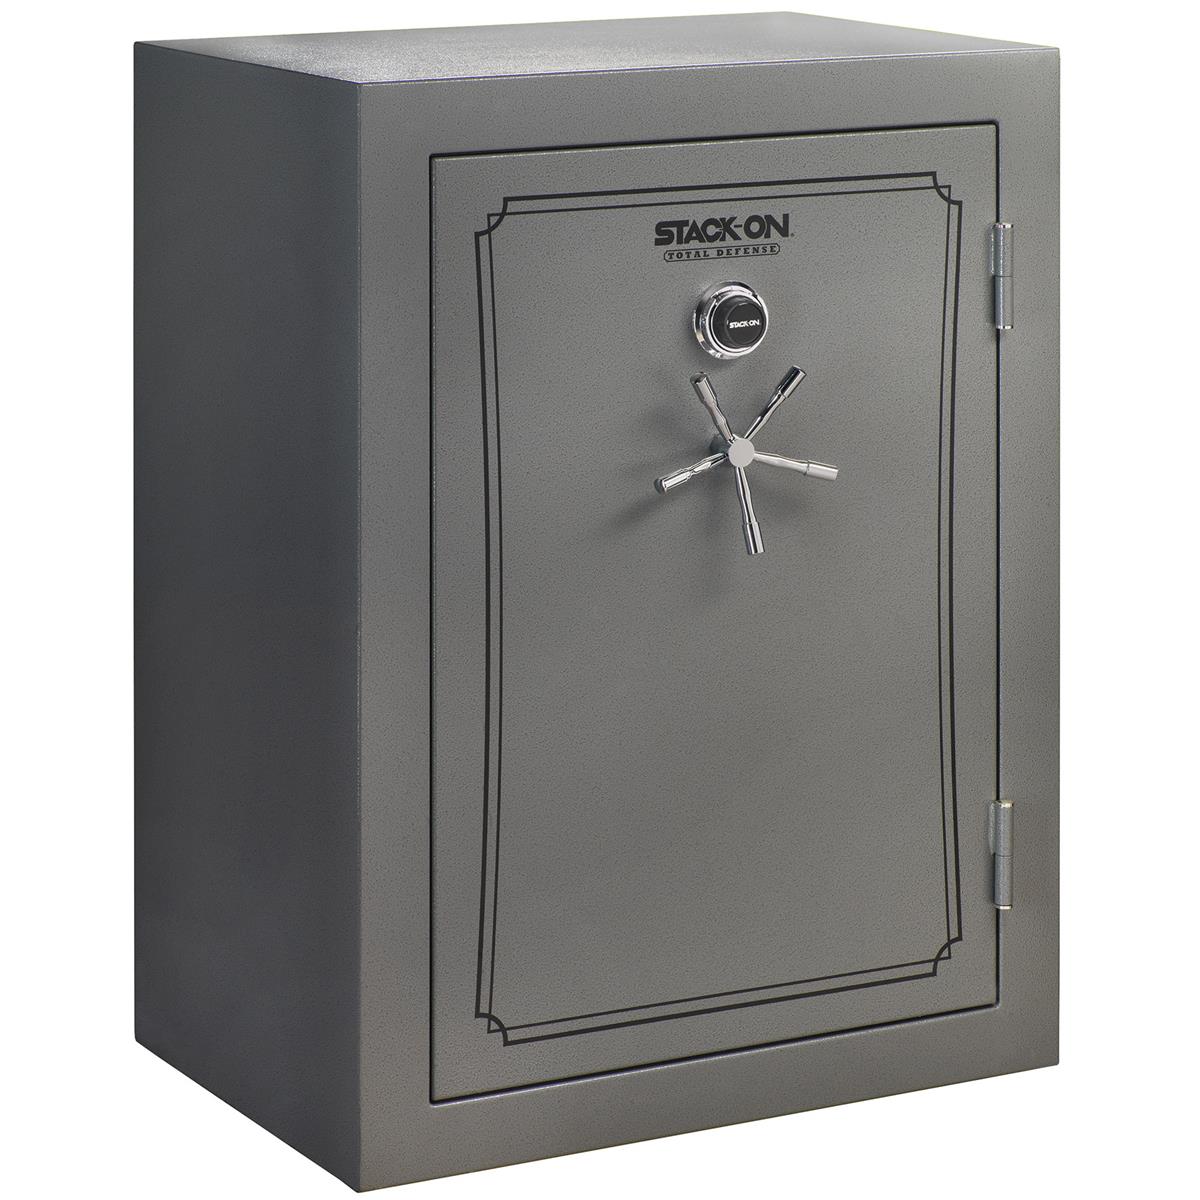 Stack-On 51-69 Gun Capacity Safe with Back-lit Electronic Lock, Gray Pebble -  TD-69-GP-E-S